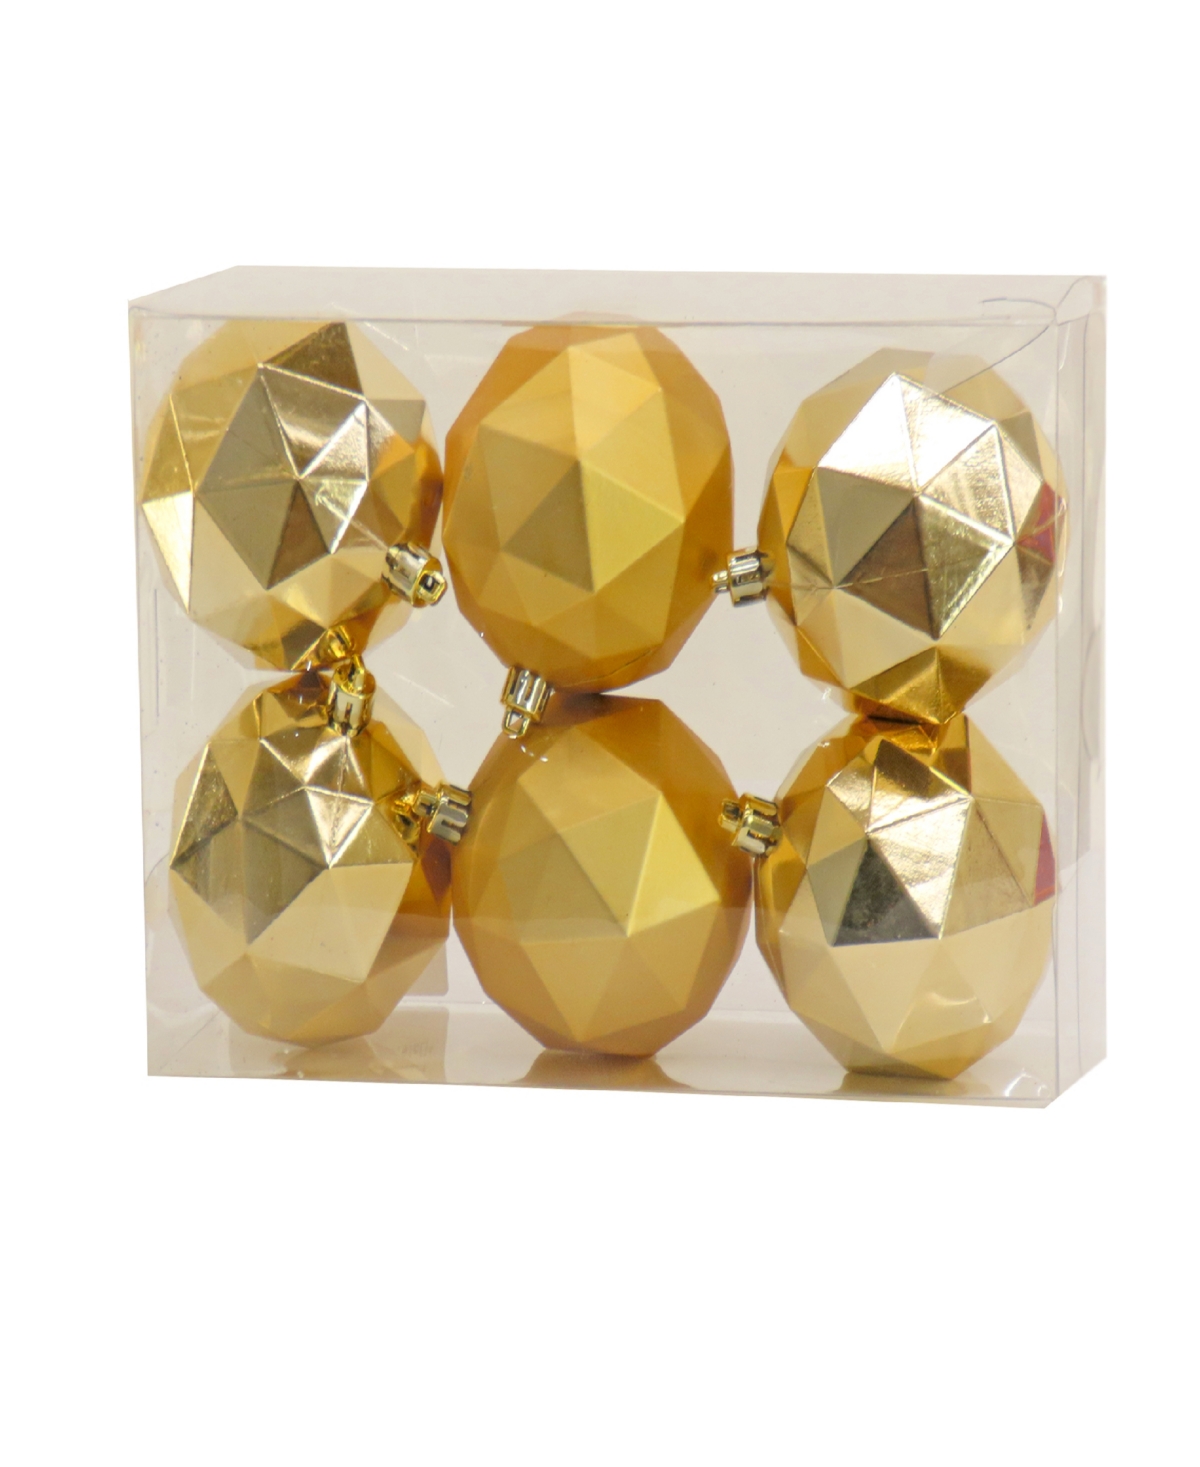 National Tree Company First Traditions 6 Piece Shatterproof Geometric Ornaments In Gold